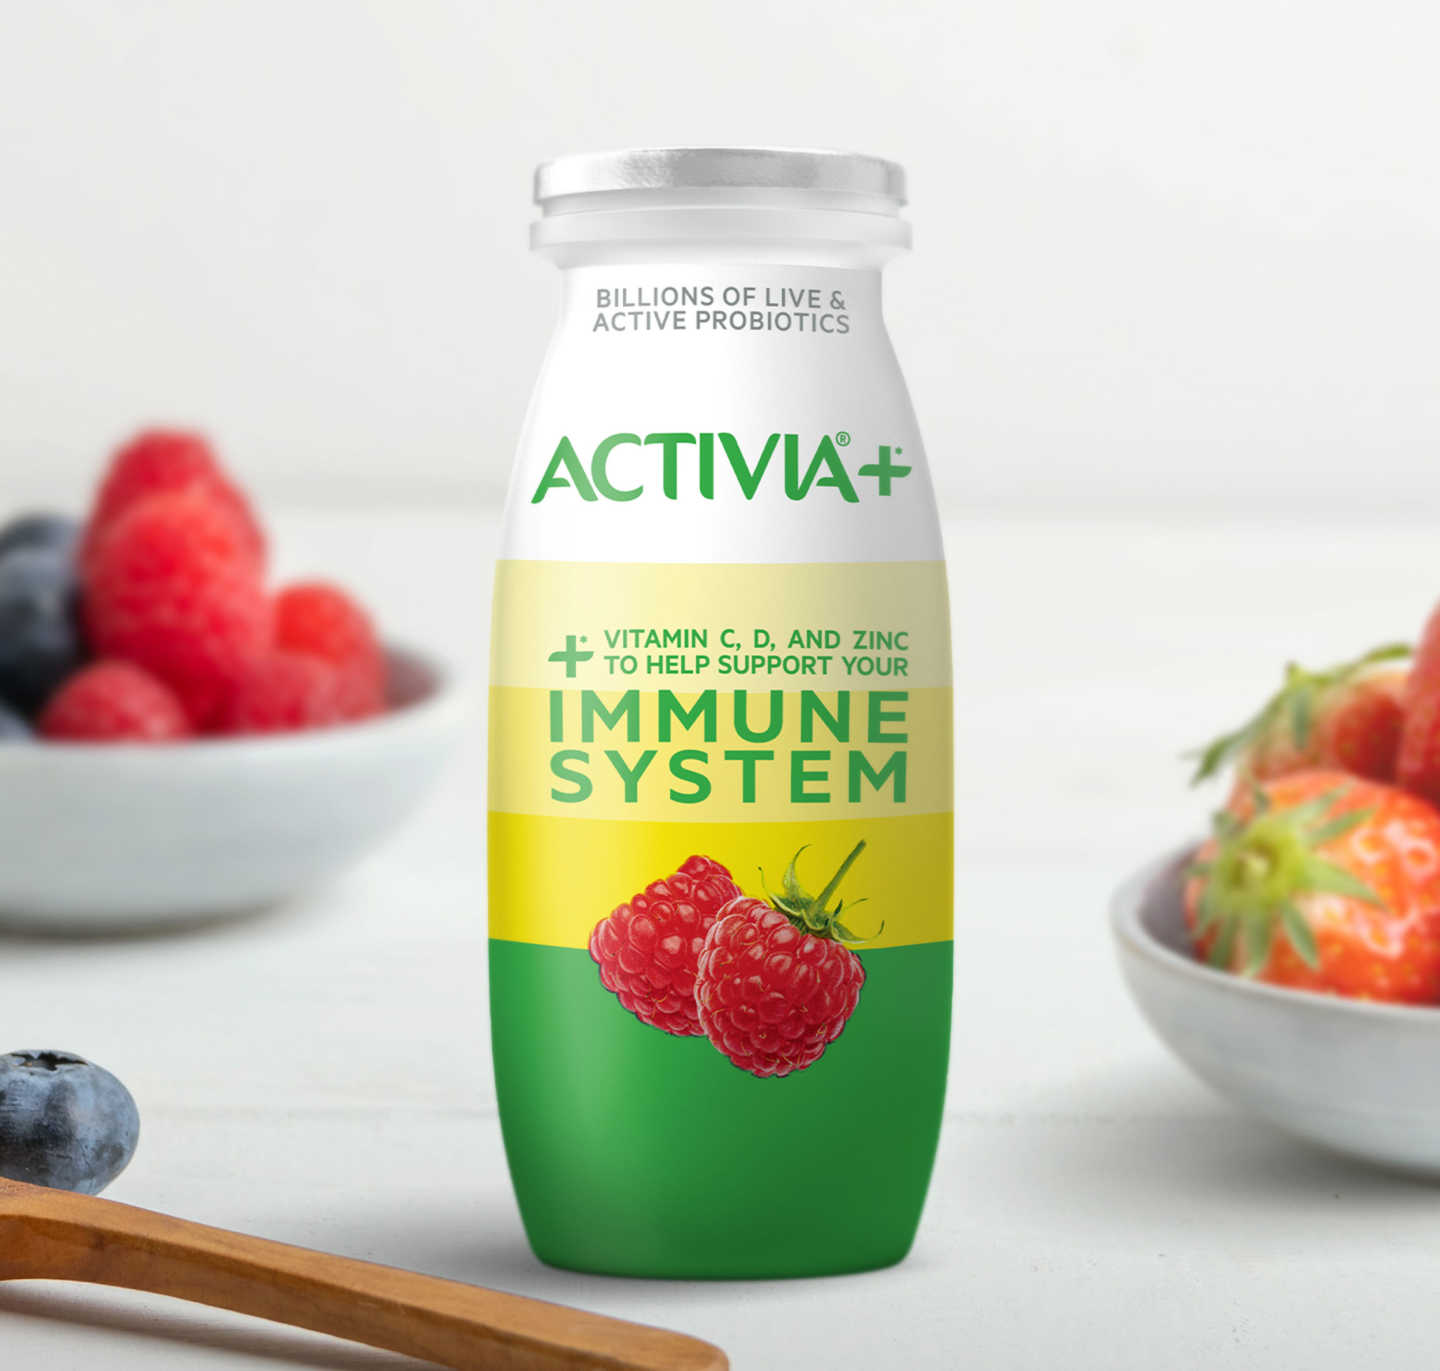 Plus up your wellness routine with Activia+!